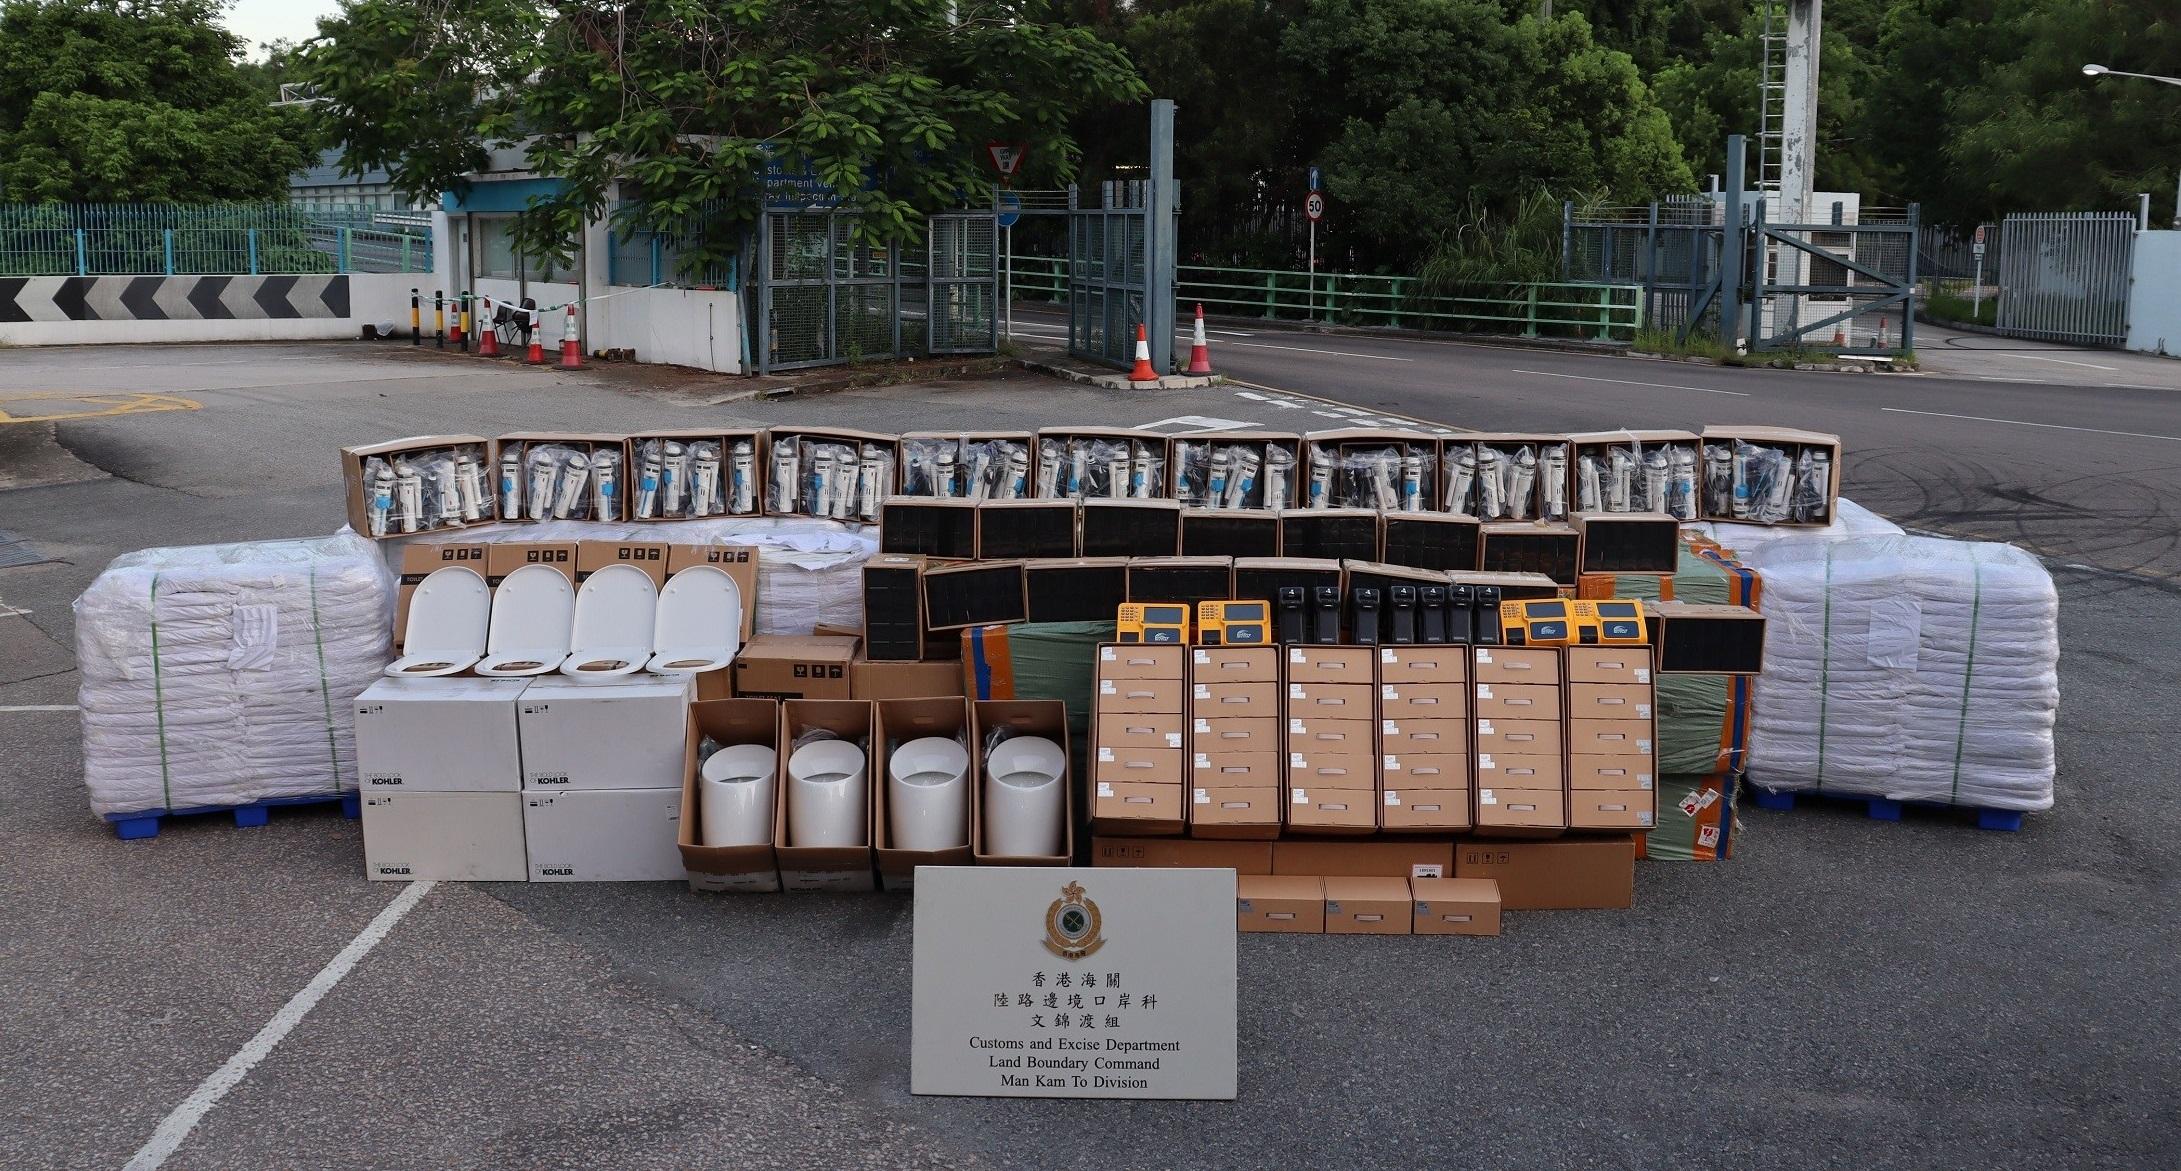 Hong Kong Customs yesterday (July 24) seized a large batch of suspected smuggled goods, including about 3 100 smart terminal devices, about 17 000 pieces of metal parts, about 5 200 pieces of rain shields and about 700 pieces of sanitary ware, with a total estimated market value of about $7.5 million at the Man Kam To Control Point. Photo shows the suspected smuggled goods seized.